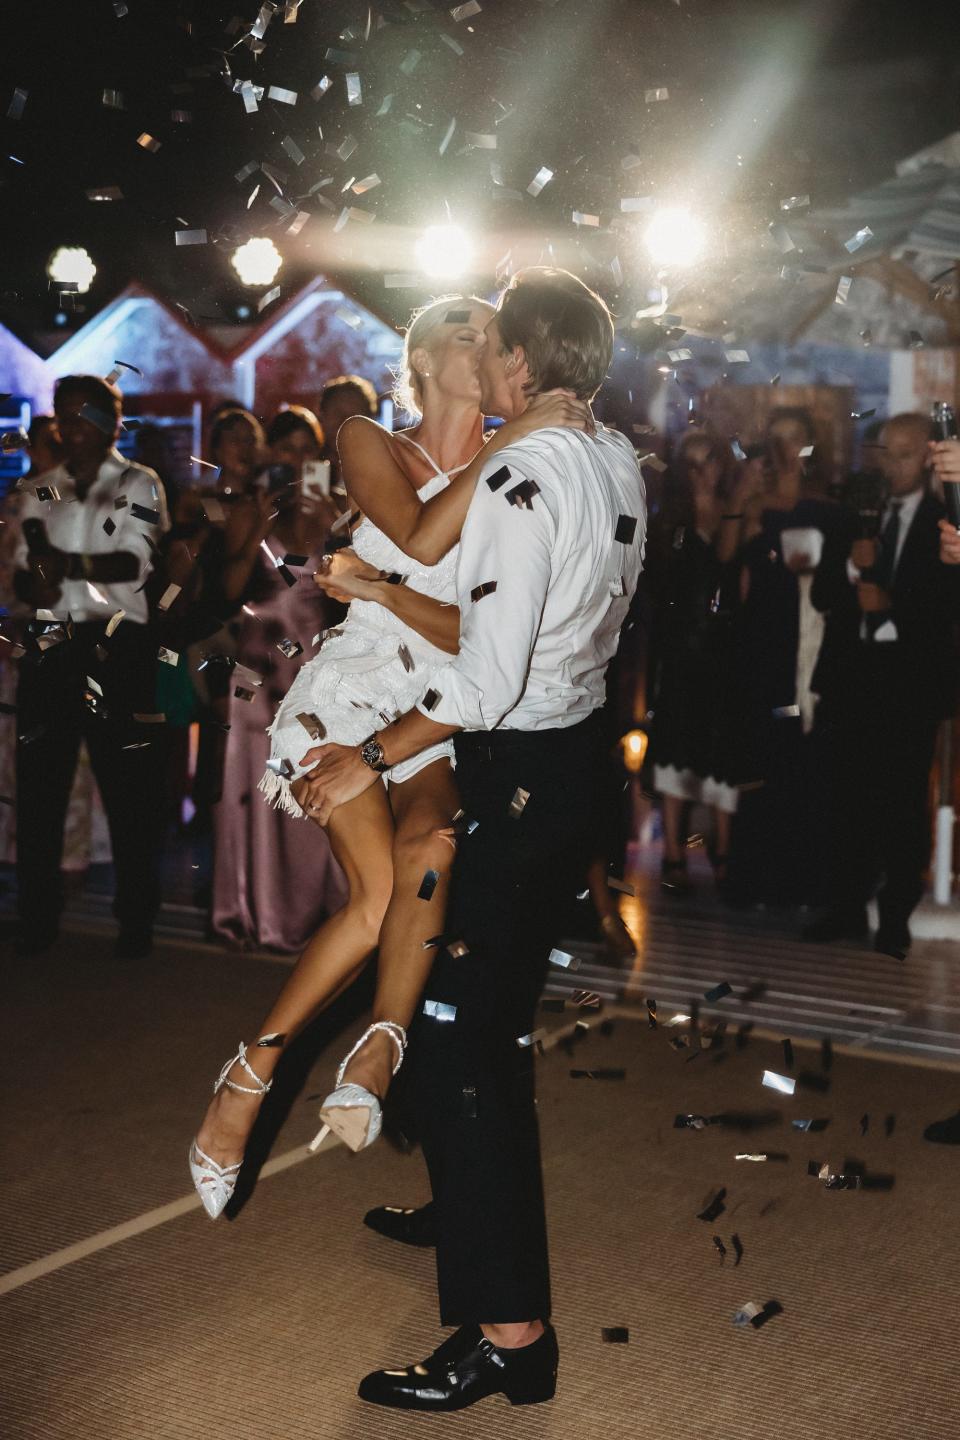 A groom lifts his bride as they dance and confetti falls around them.